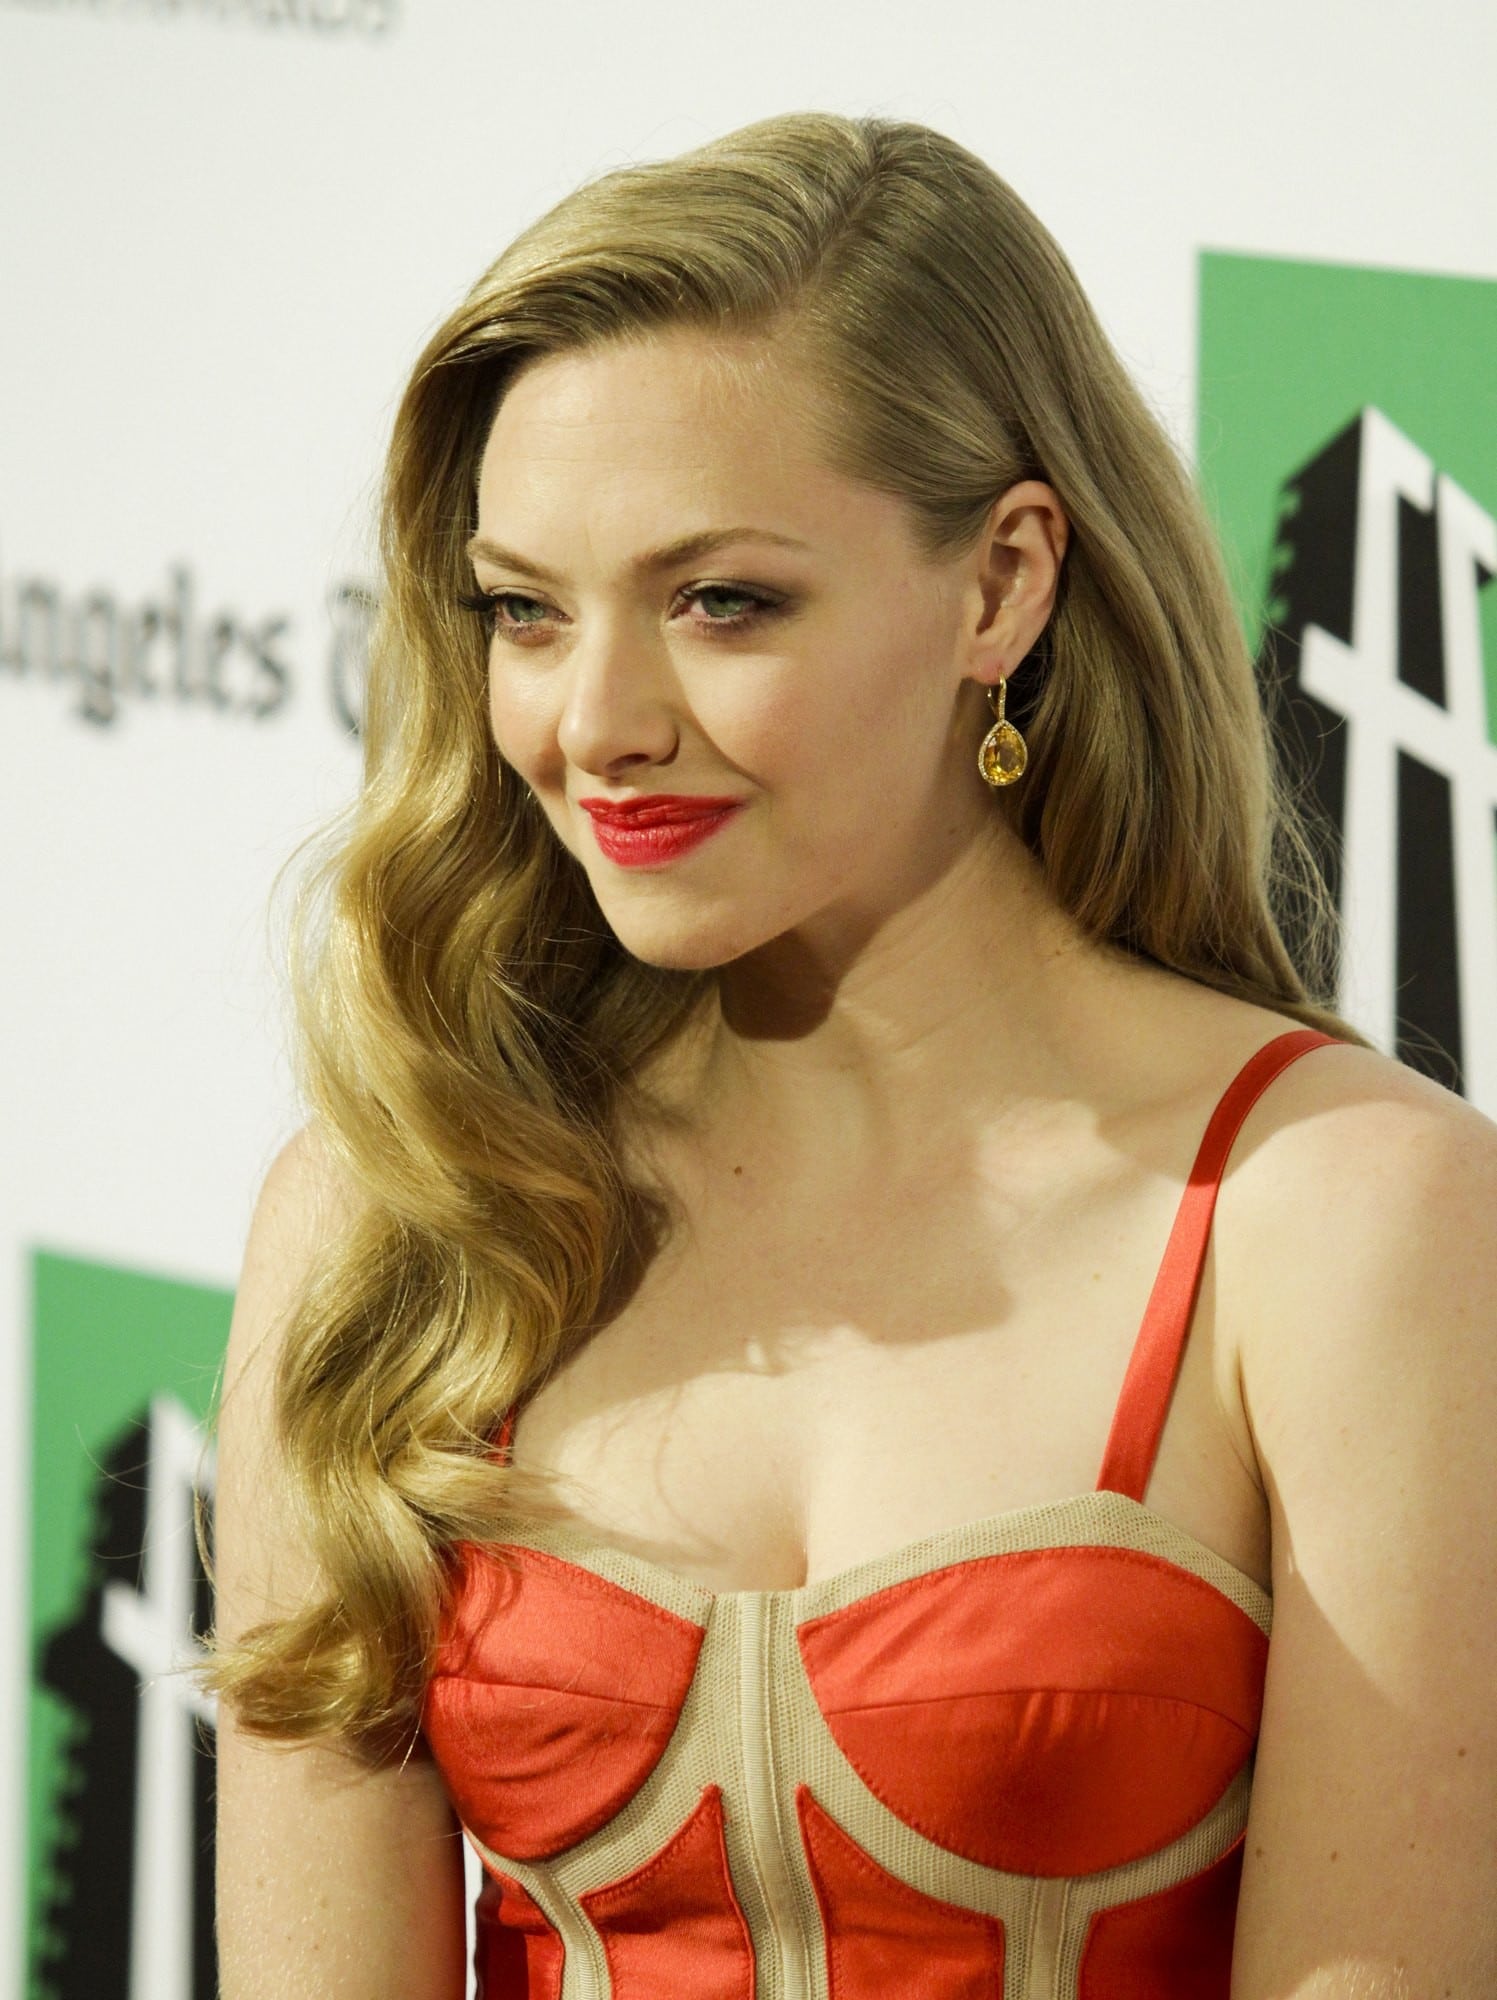 gorgeous pic of amanda seyfried on the red carpet wearing orange red dress and smiling at the camera